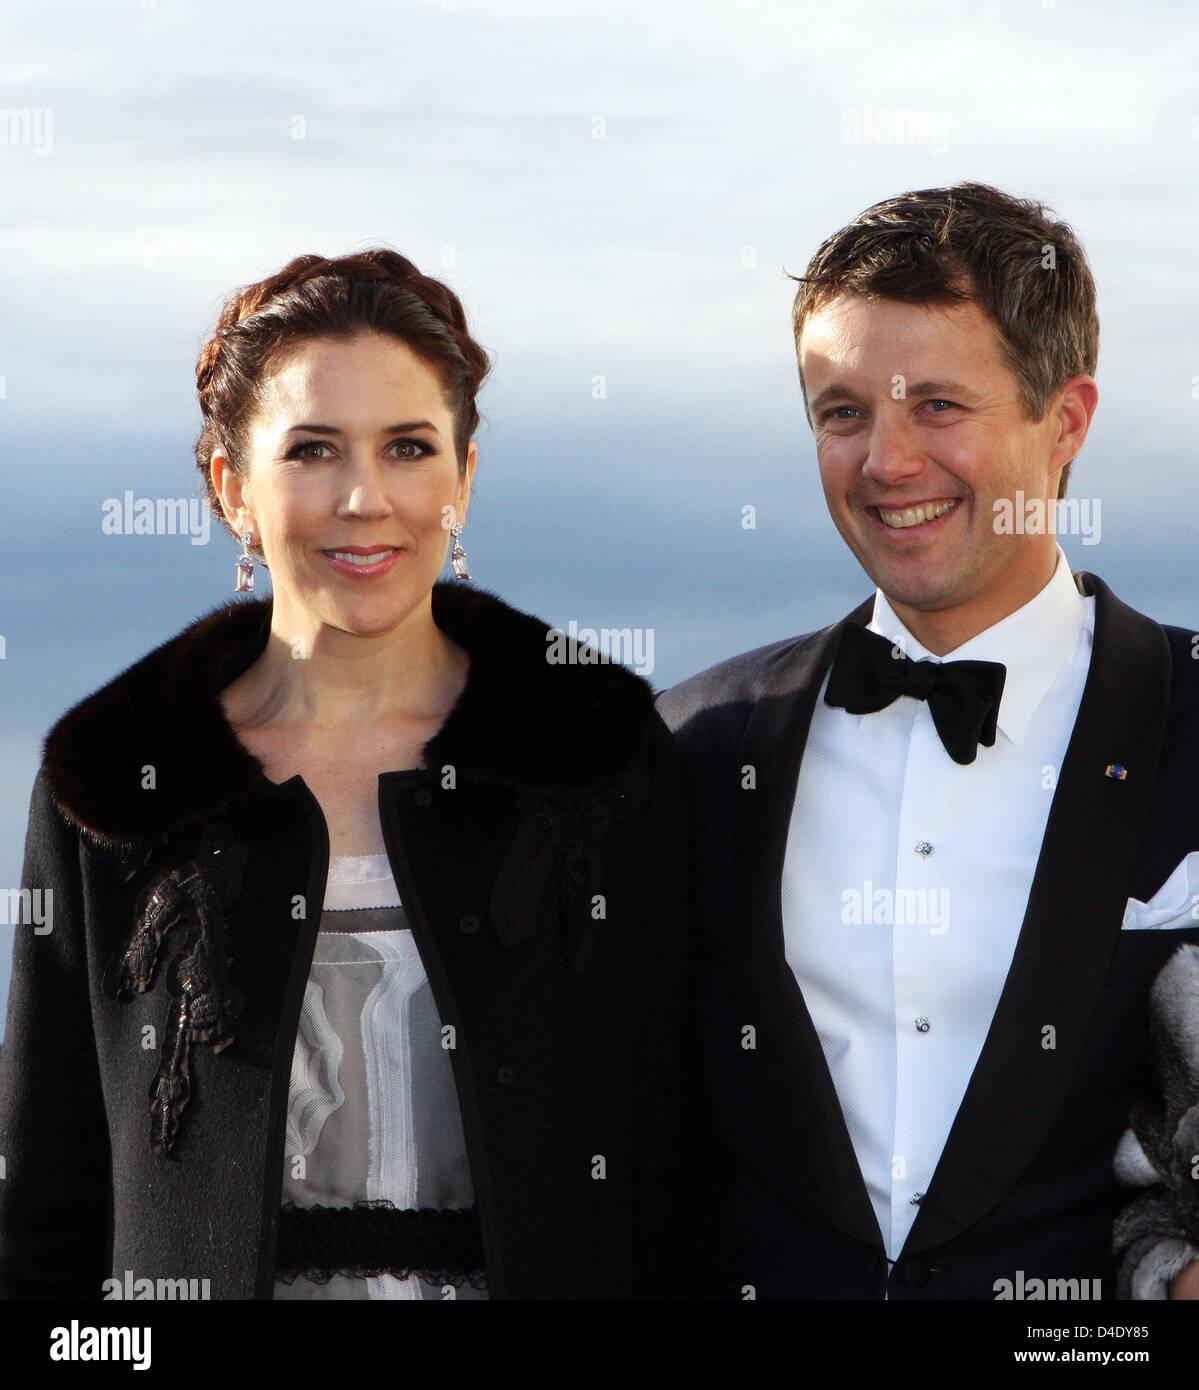 crown-prince-frederik-of-denmark-and-princess-mary-of-denmark-smile-D4DY85.jpg